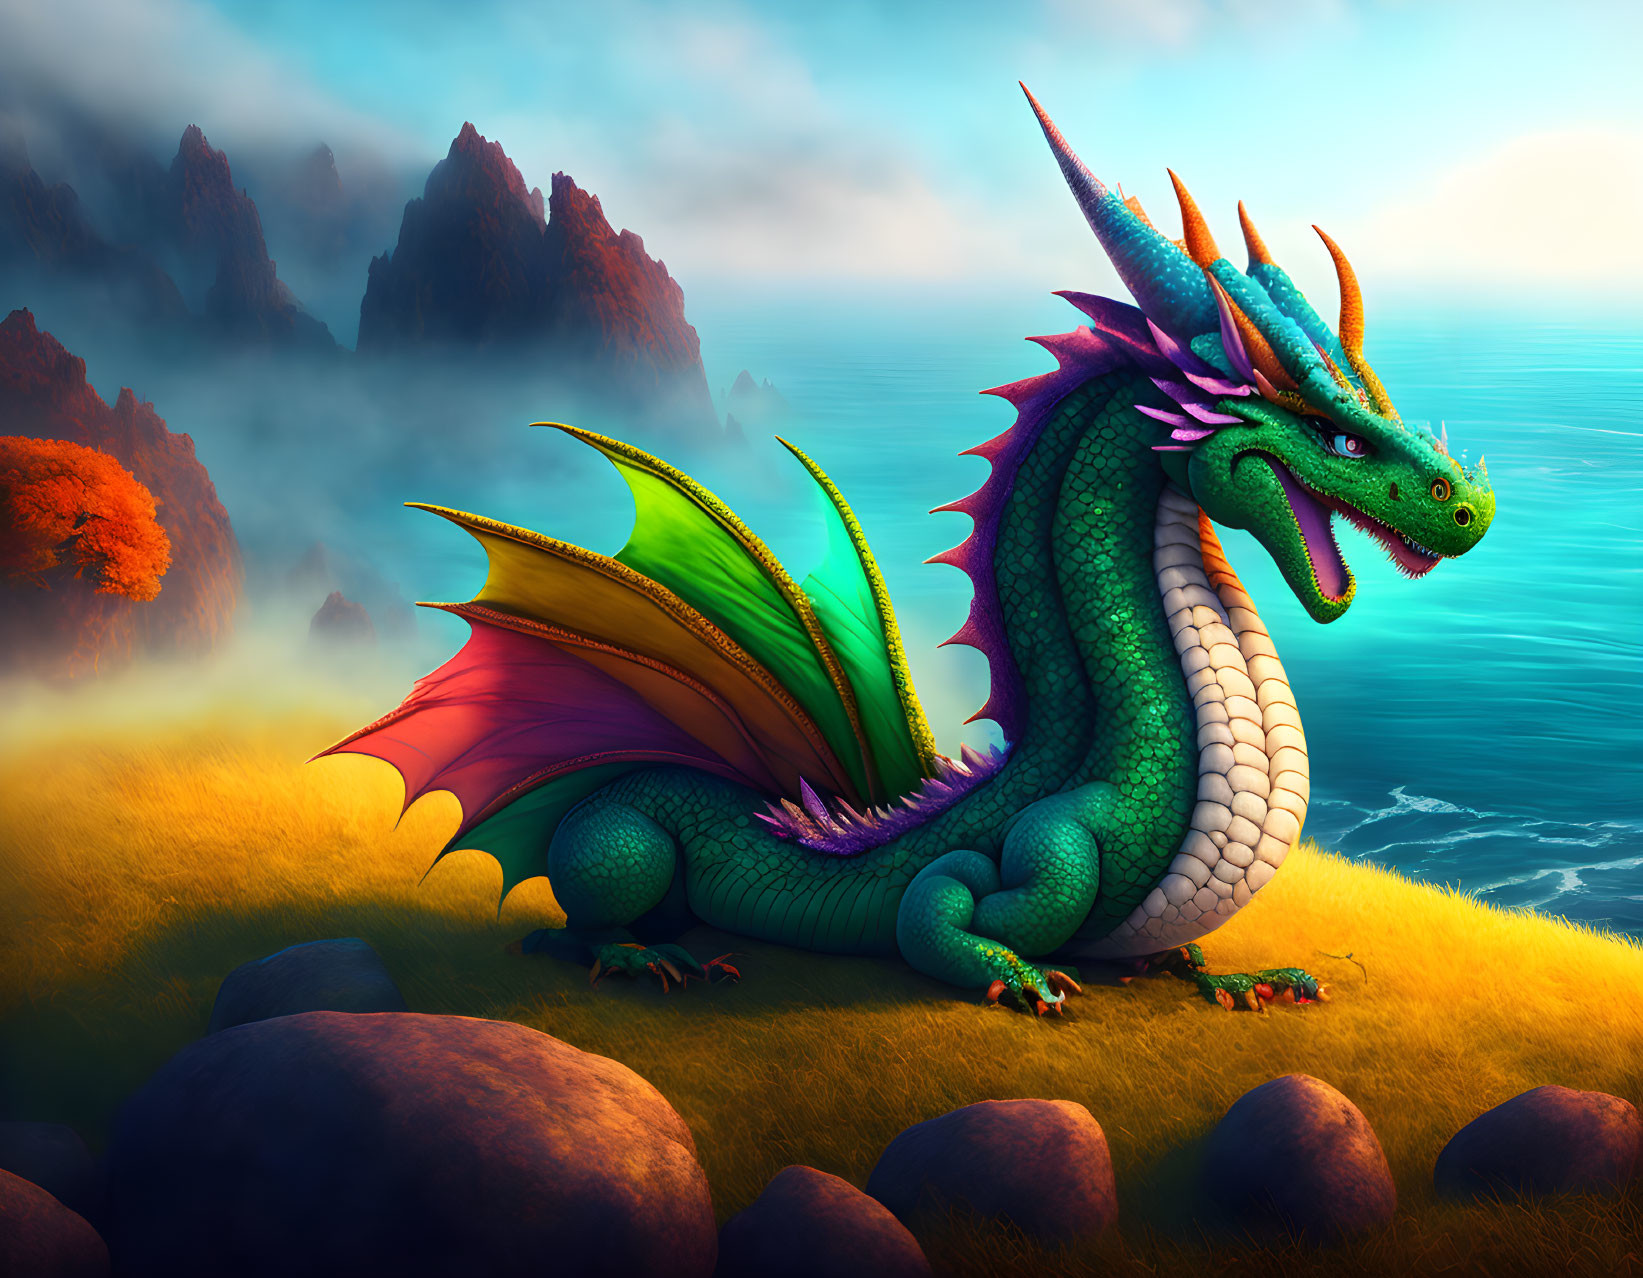 Colorful Green Dragon Artwork Among Autumn Trees and Sea Cliffs